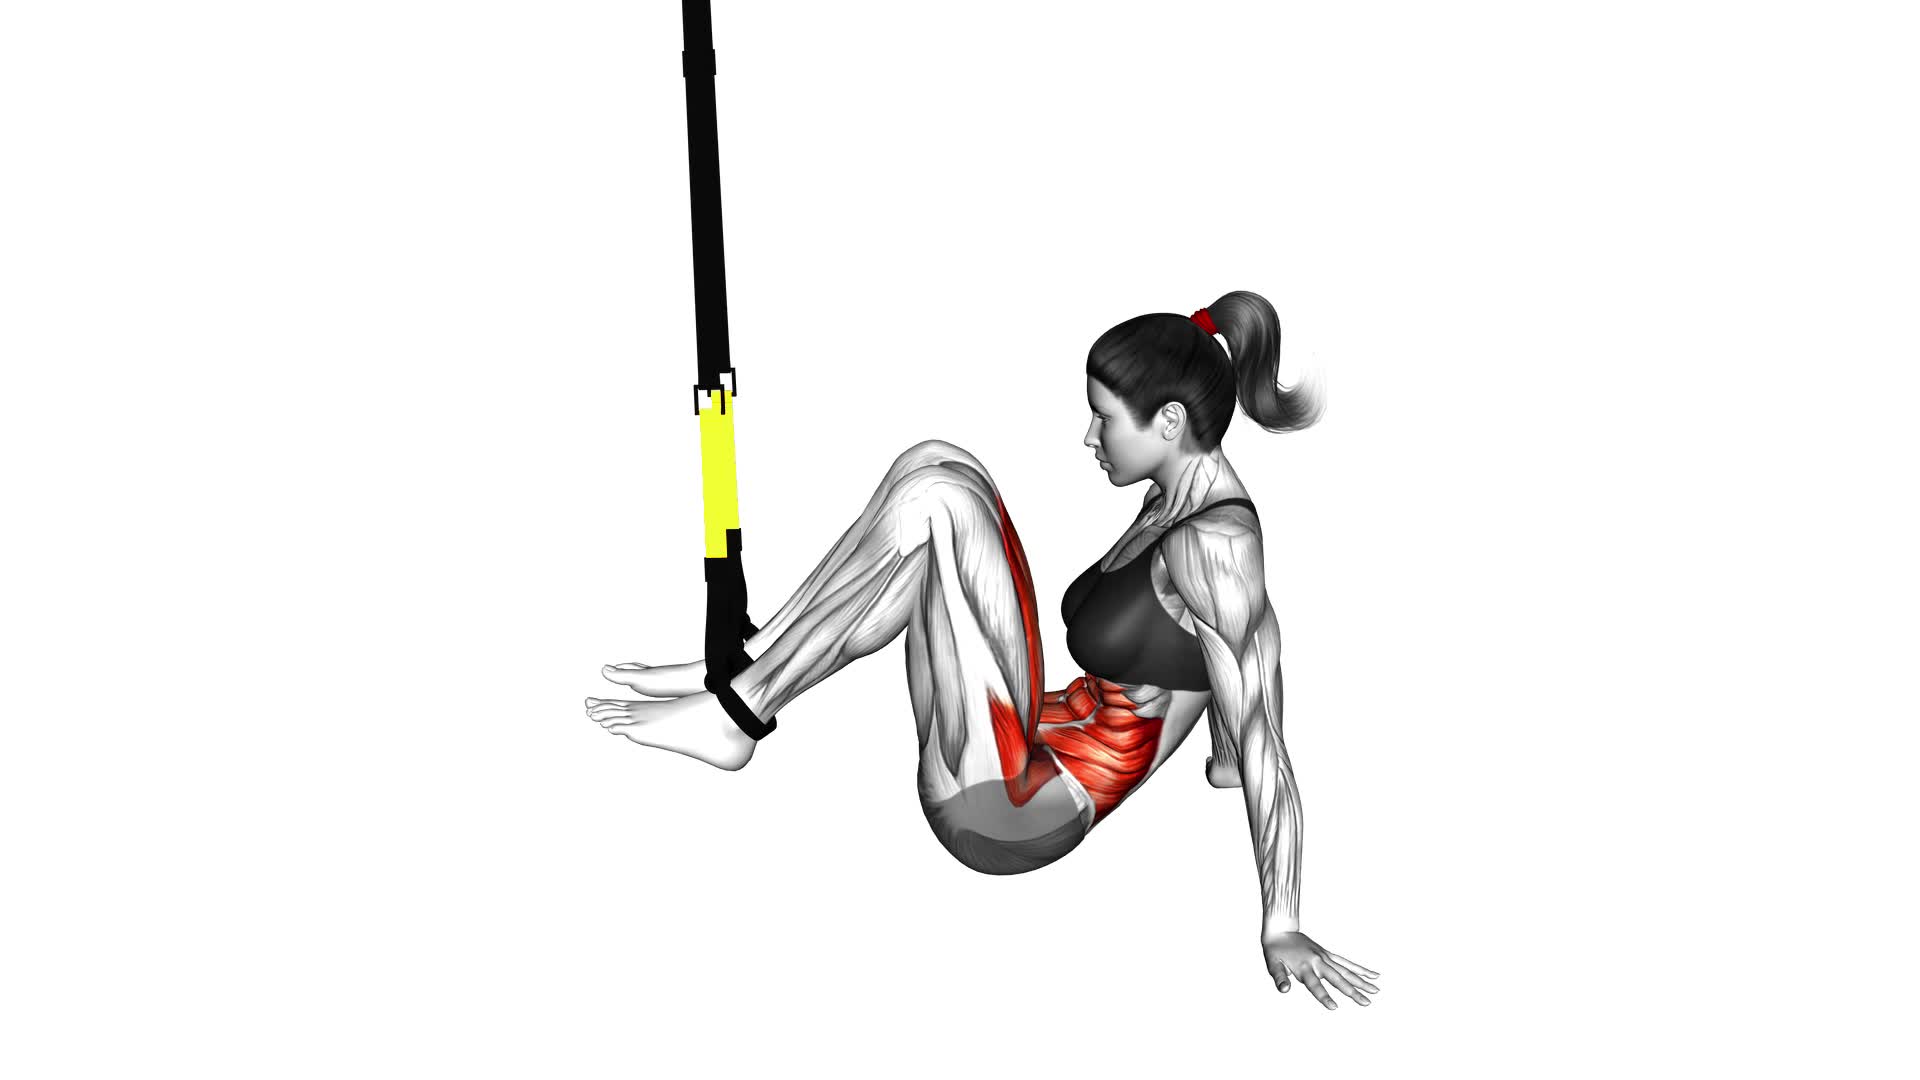 Suspender Supine Crunch - Video Exercise Guide & Tips